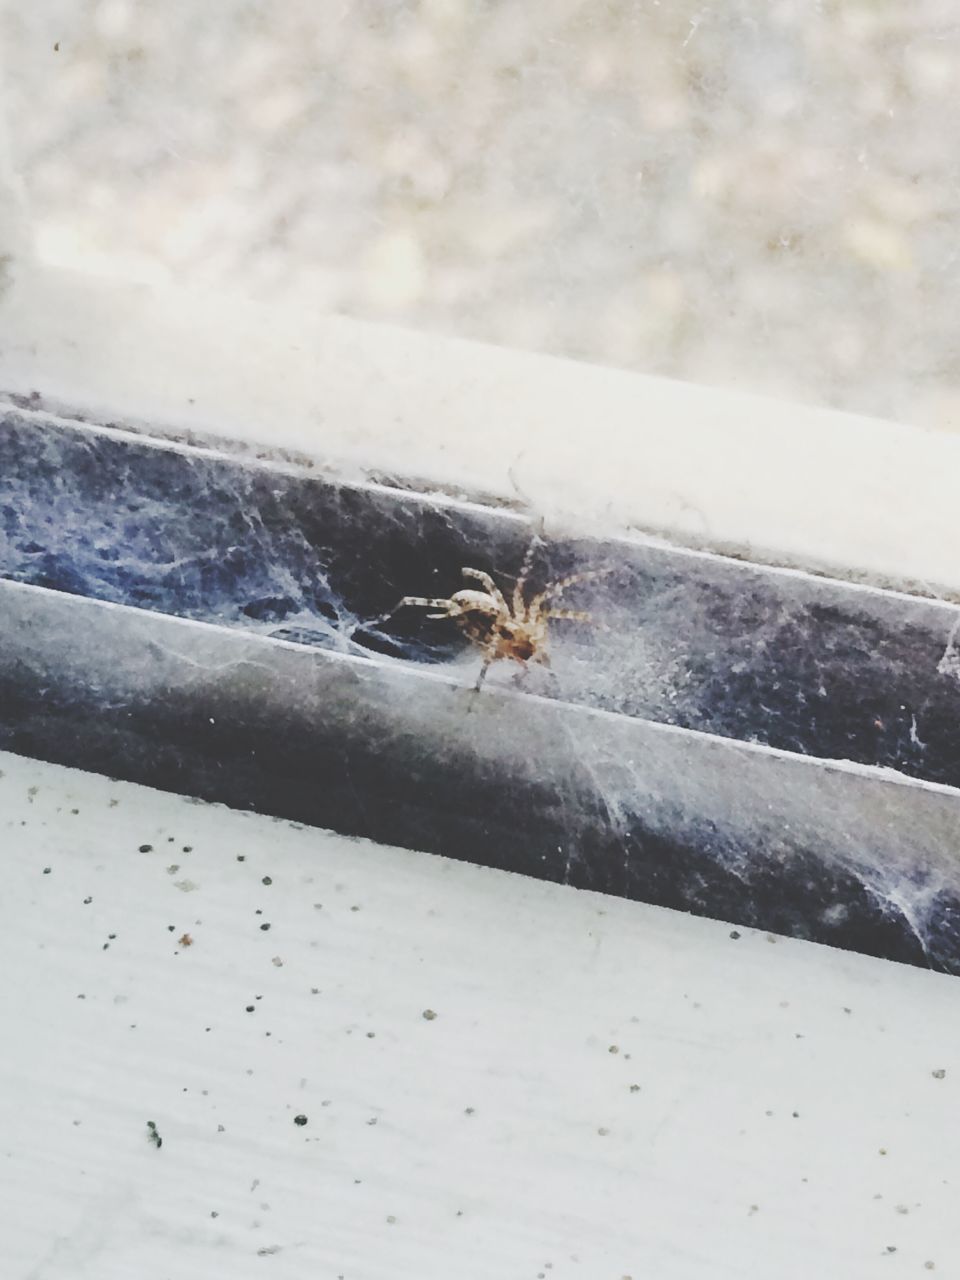 animal themes, animals in the wild, one animal, insect, wildlife, spider, close-up, nature, selective focus, day, wall - building feature, zoology, outdoors, focus on foreground, high angle view, no people, spider web, full length, window